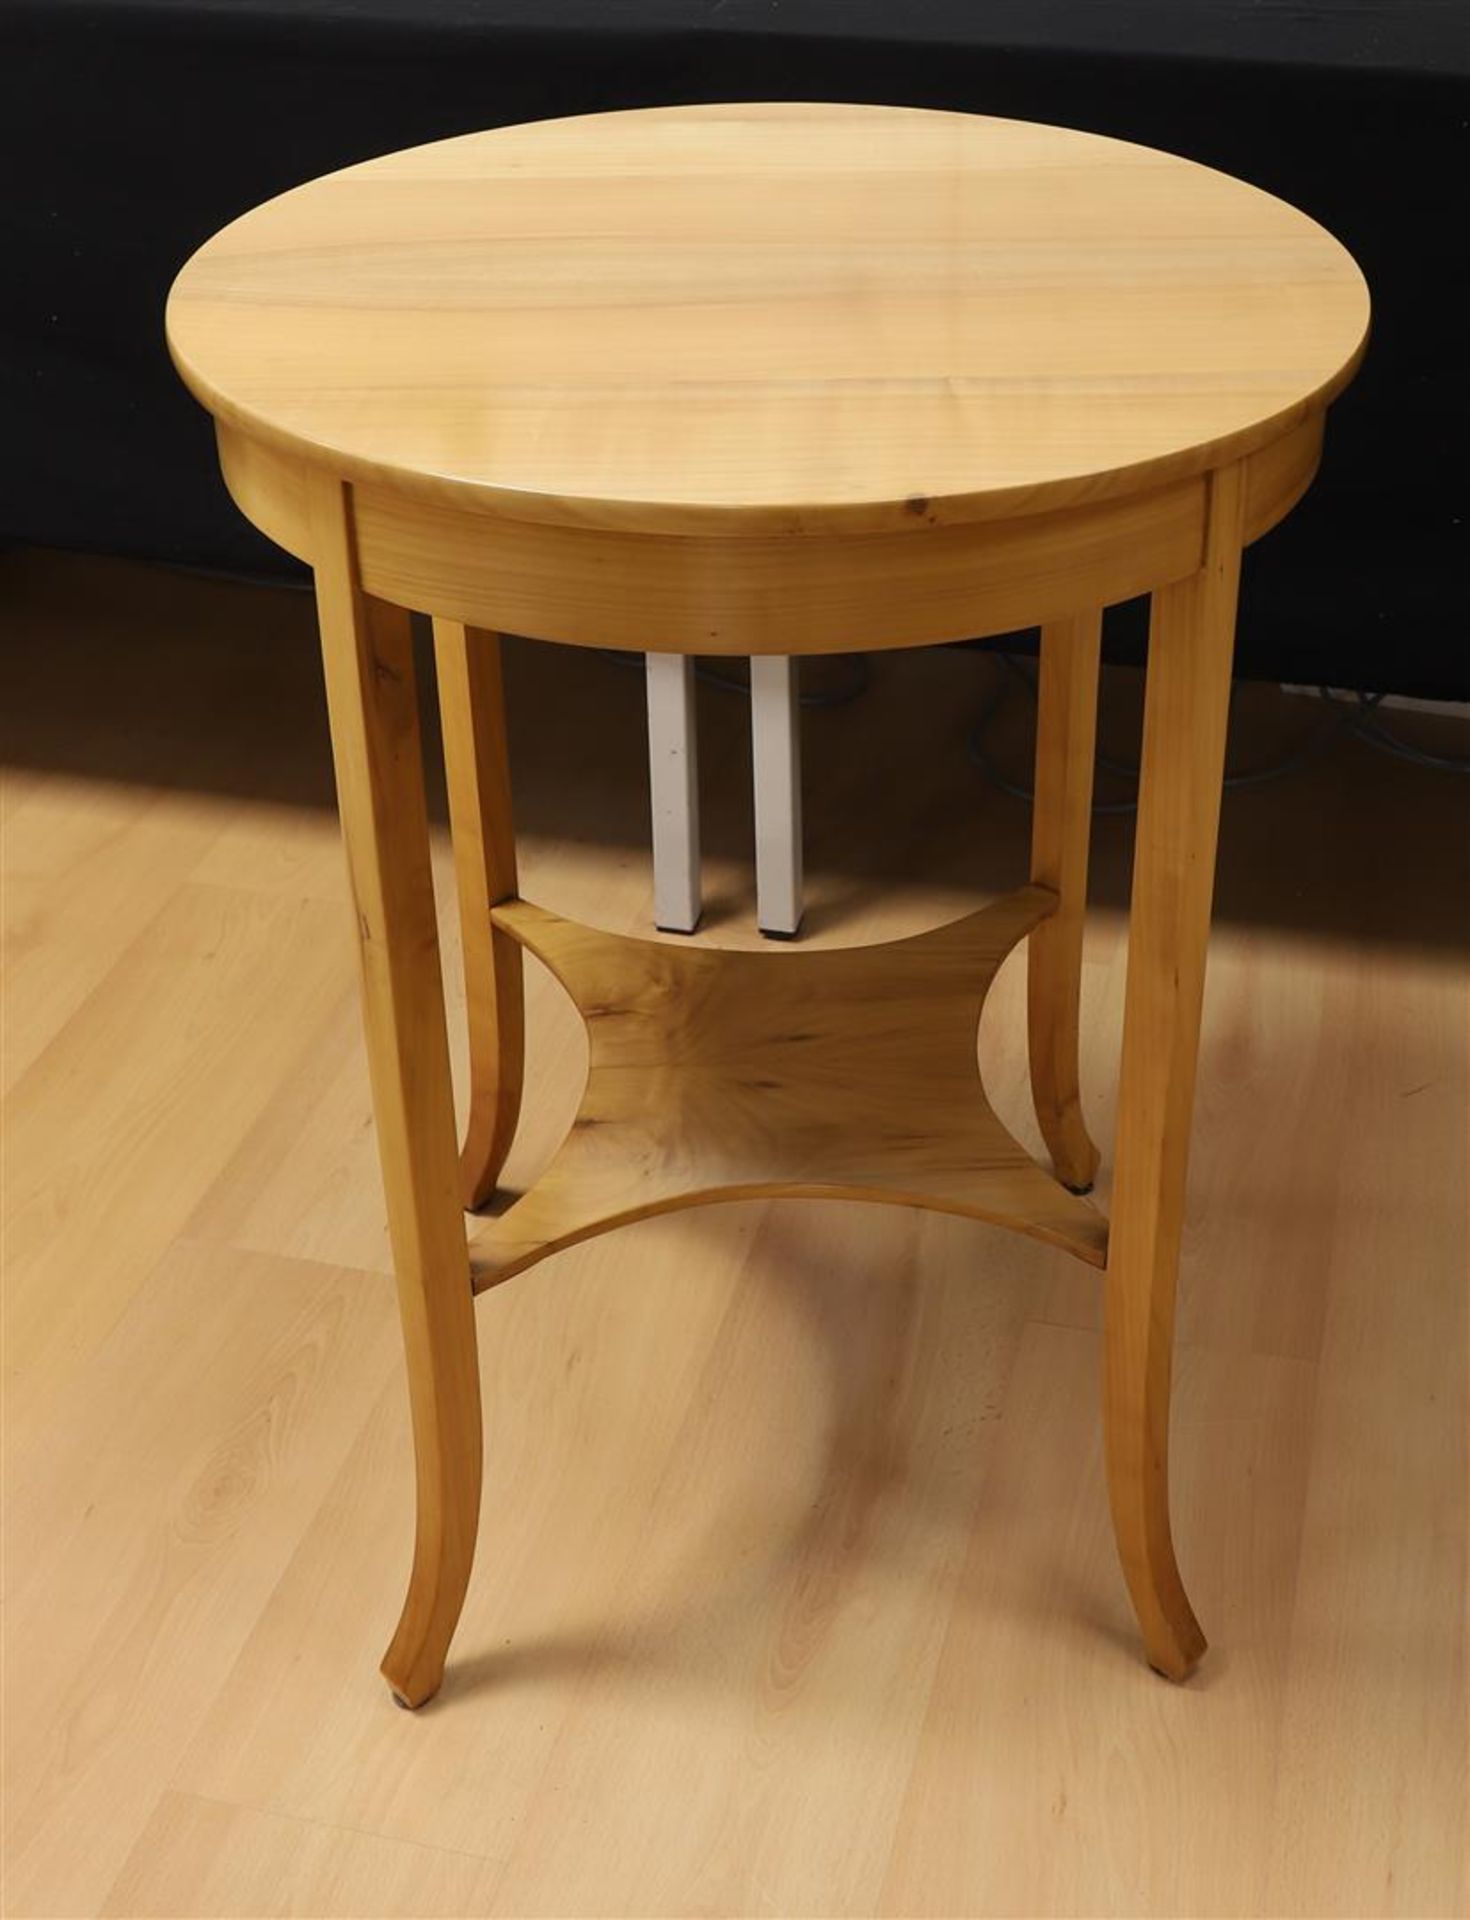 A round veneered wooden coffee table, 1st half of the 20th century.